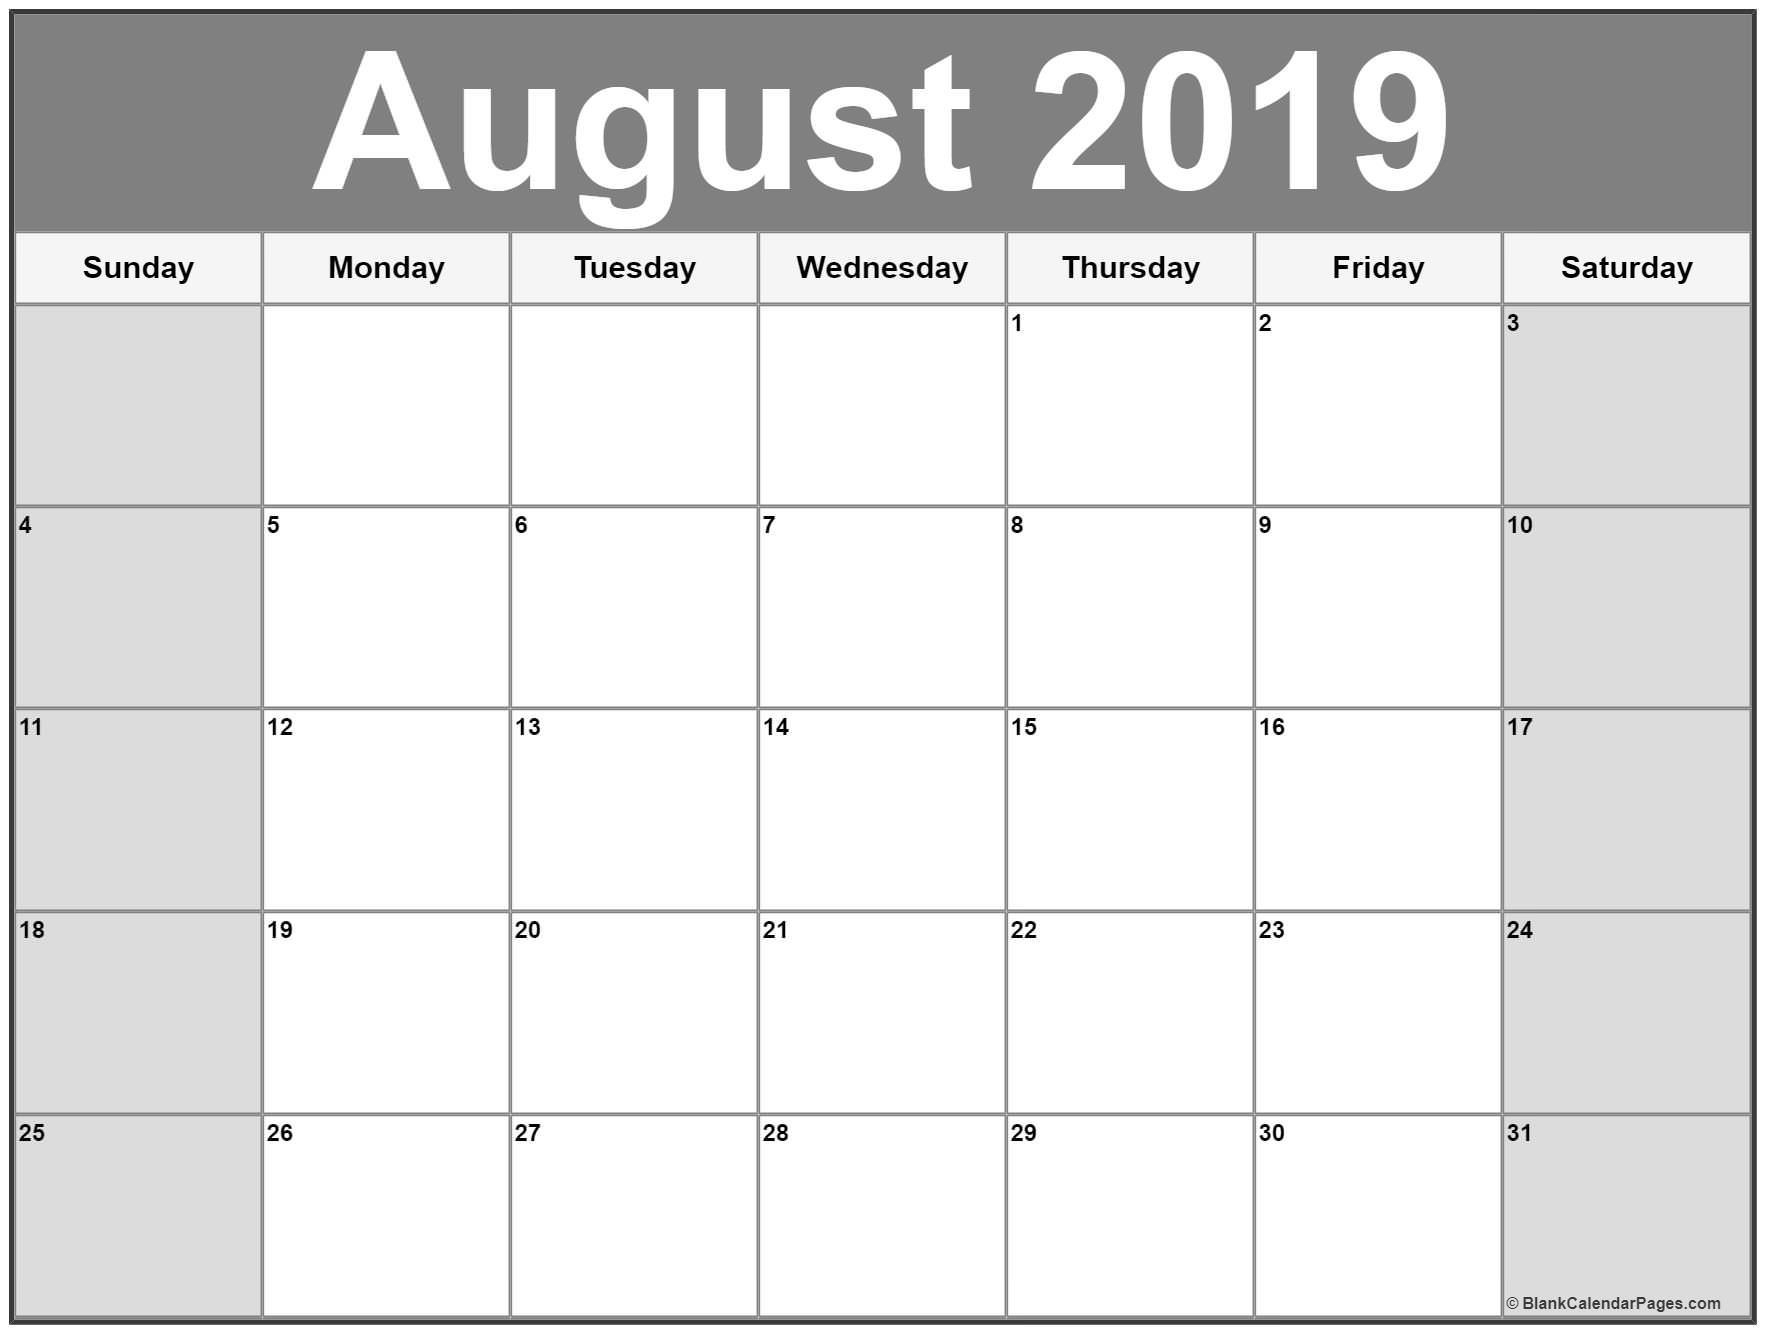 August 2019 Calendar Printable Free | Calendar Printables-Blank Timetable For The Month Of July And August